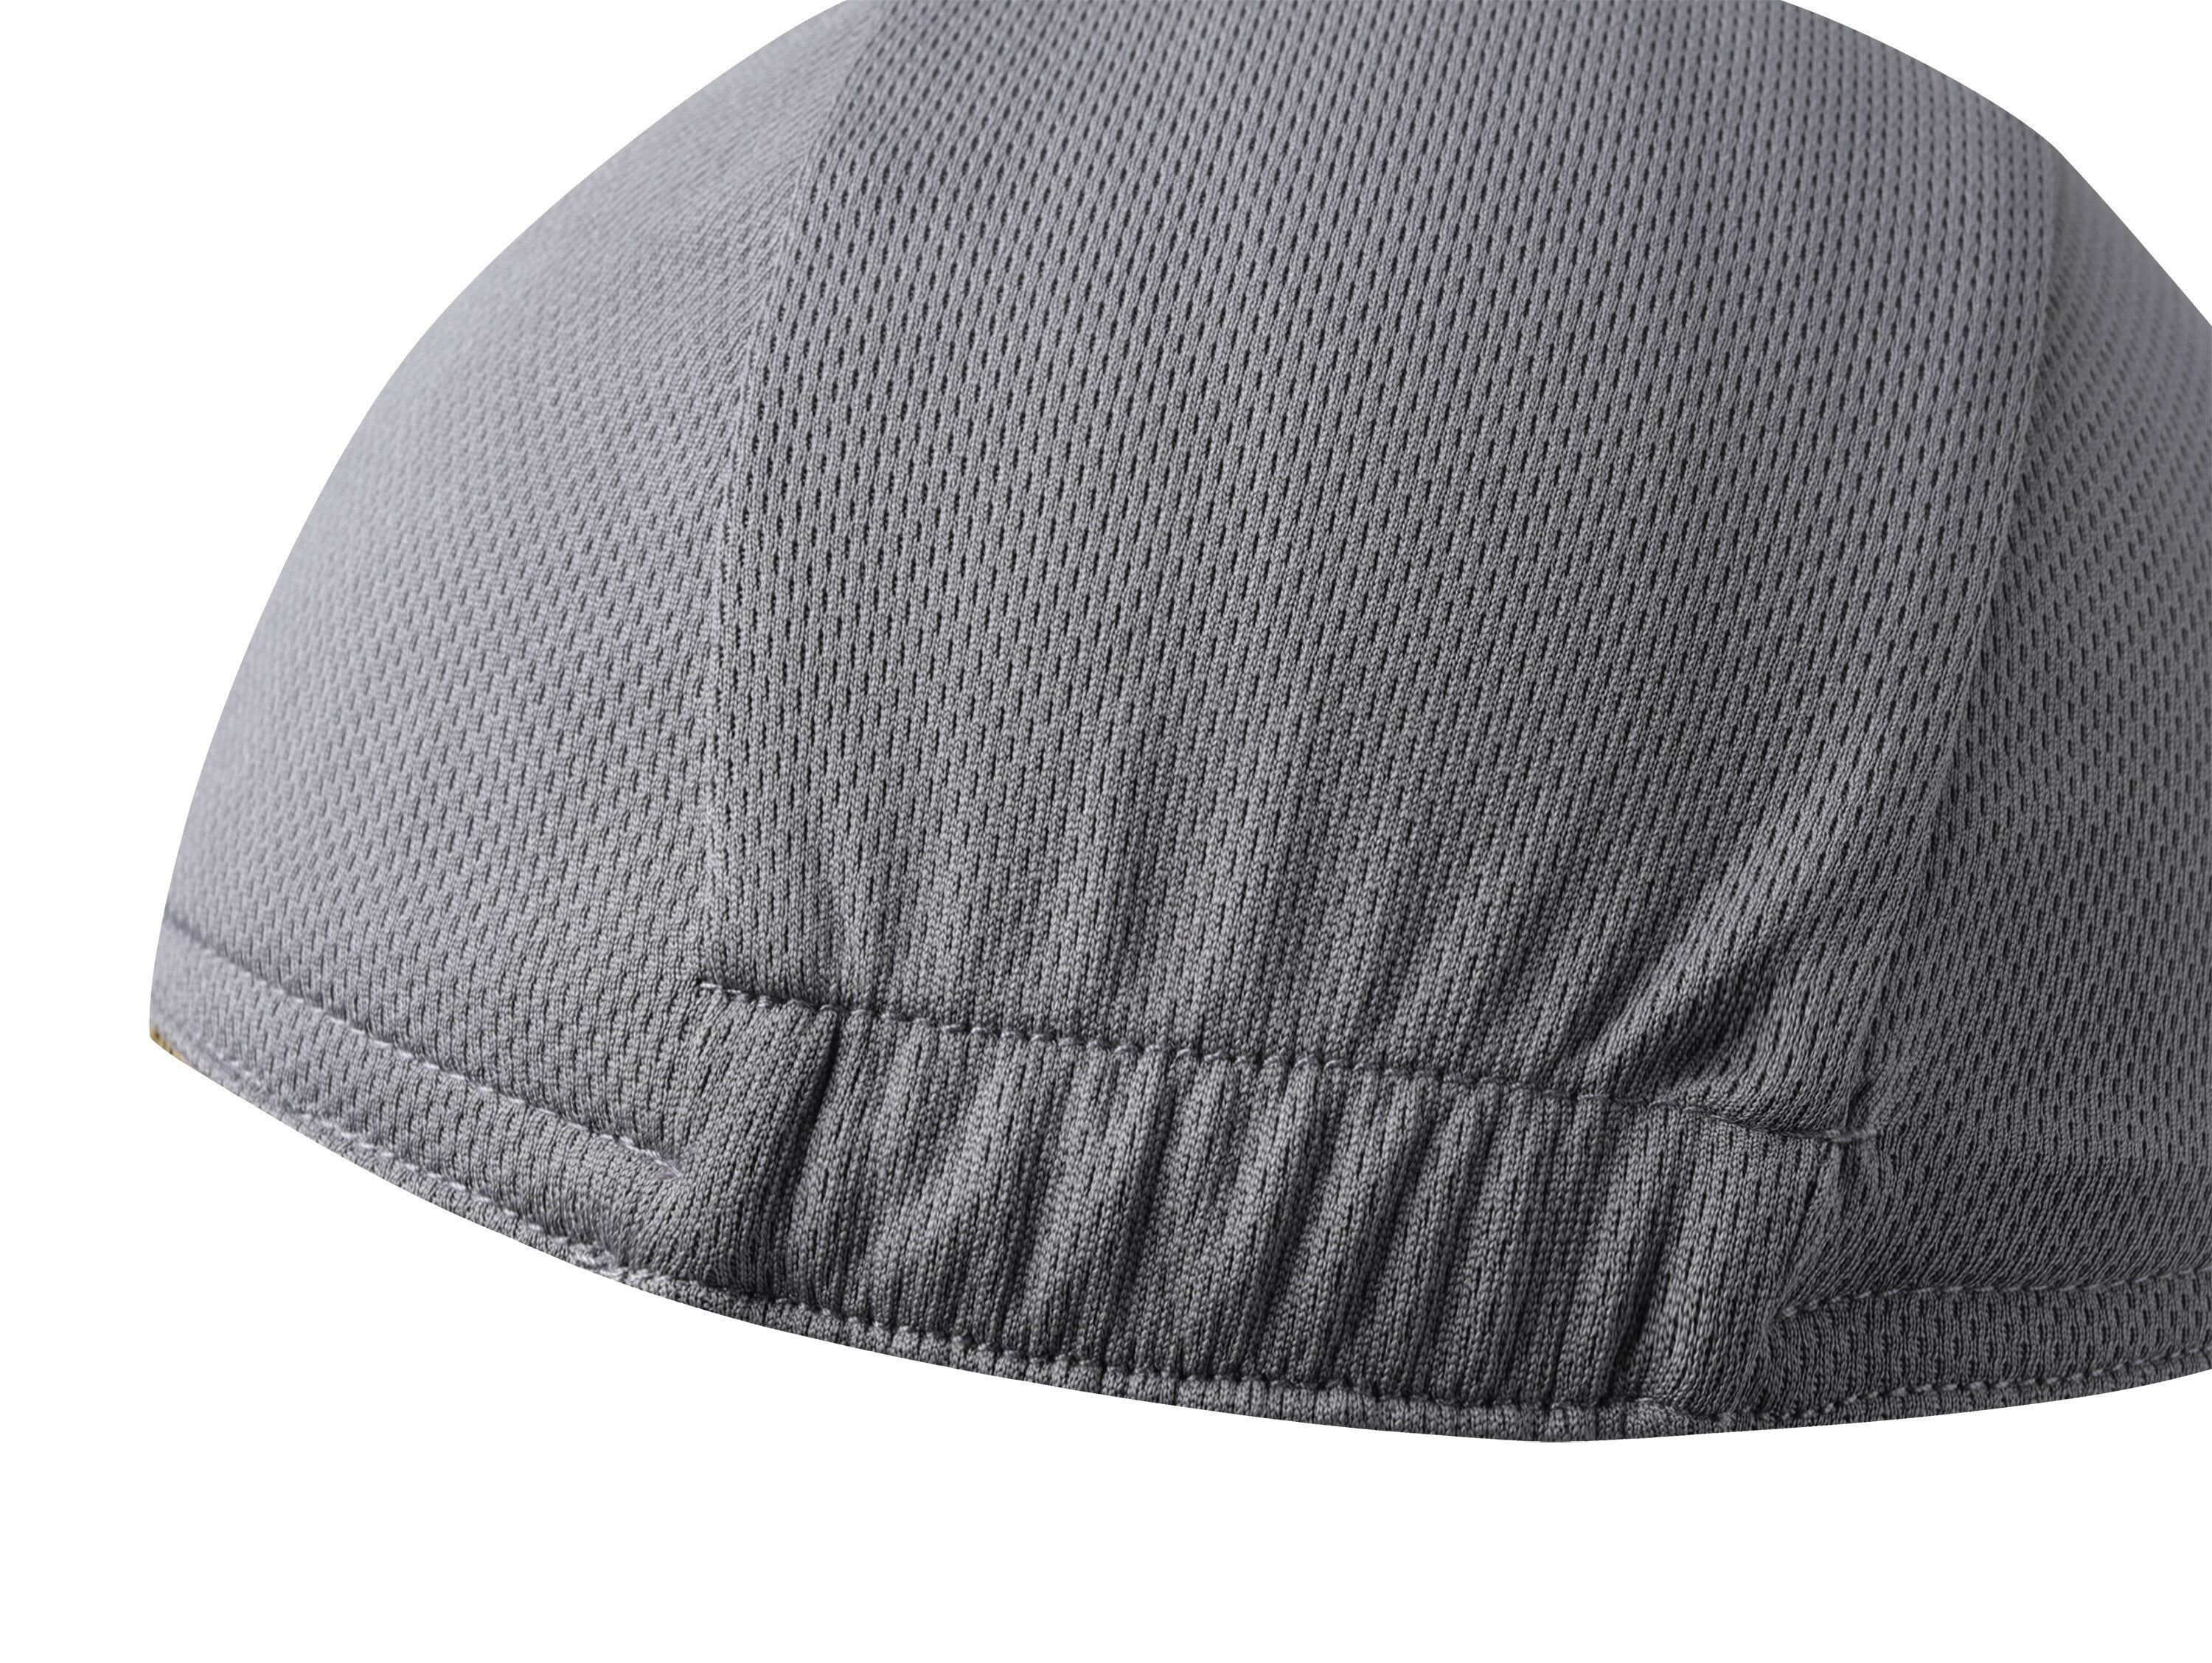 Multicolor Cycling Cap - Polyester Cycling Hat-Under Helmet - Cycling Helmet Liner Breathable&amp;Sweat Uptake